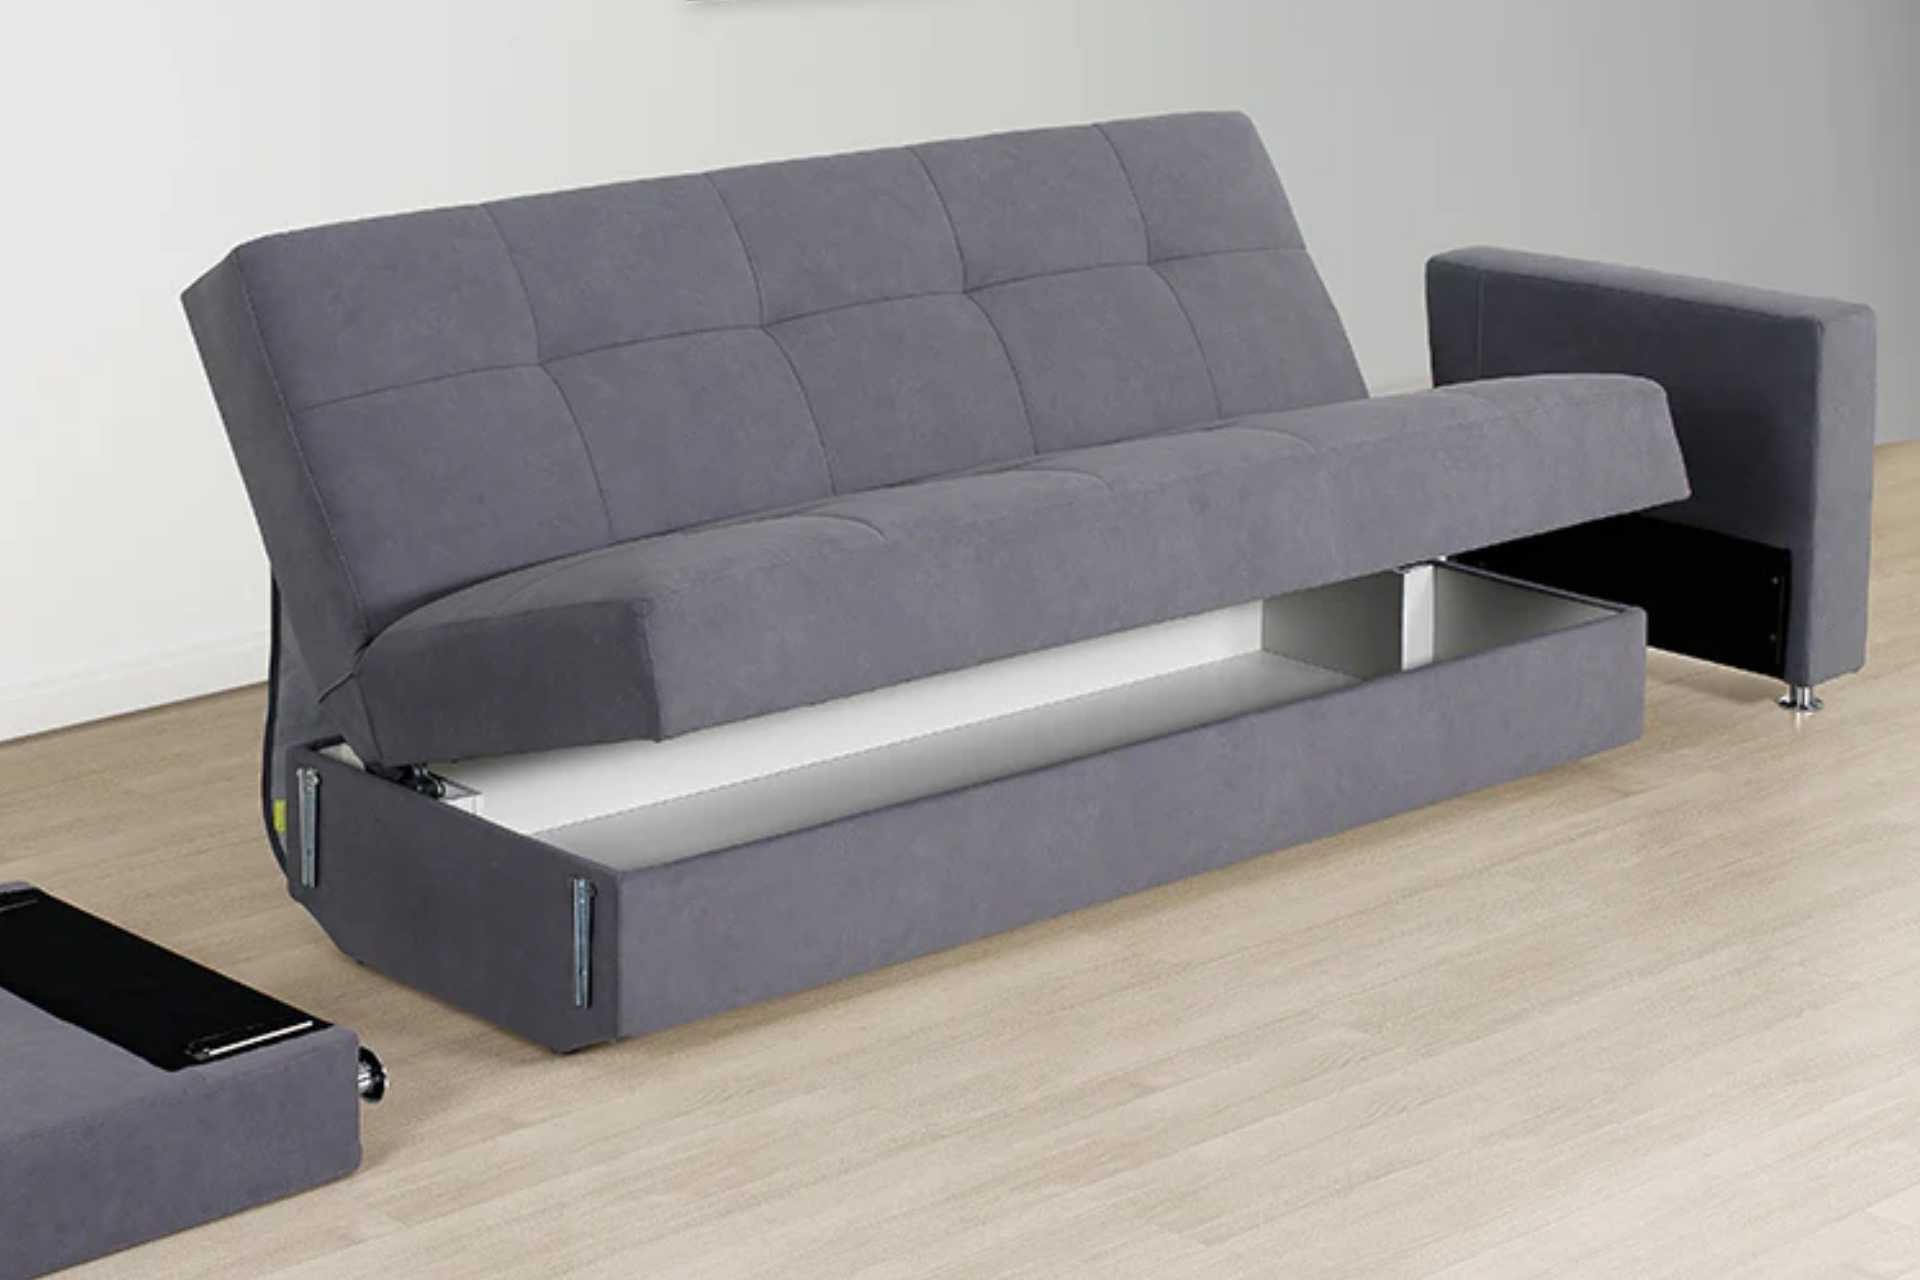 3 seater couch that opens into a sleeper couch